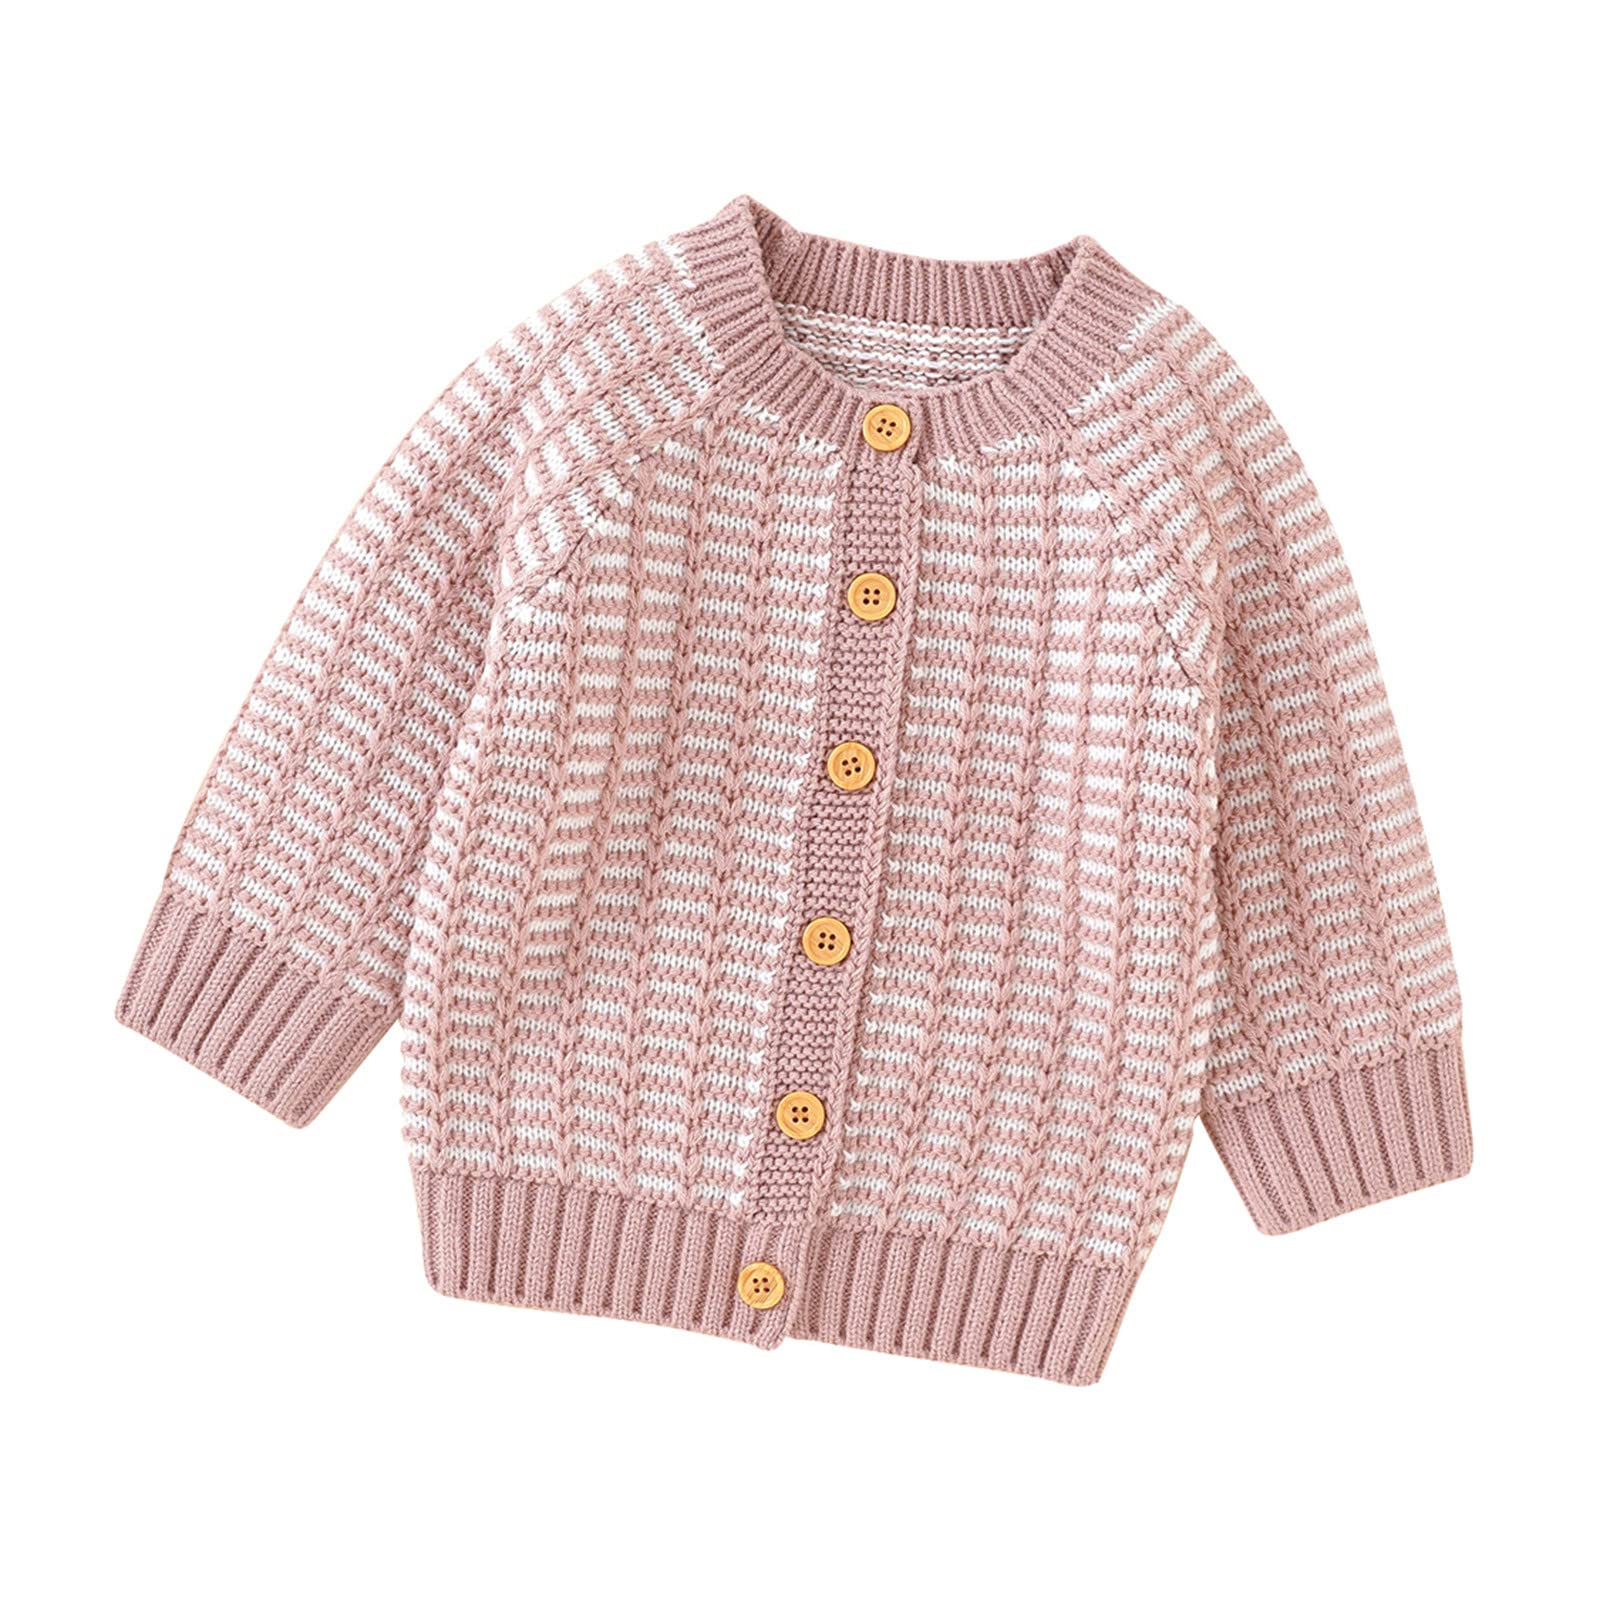 Baby Pullover Baby Girl Boy Knit Cardigan Sweater Hoodies Warm Tops Toddler Infant Outerwear Jacket Girls Clothes Age 6